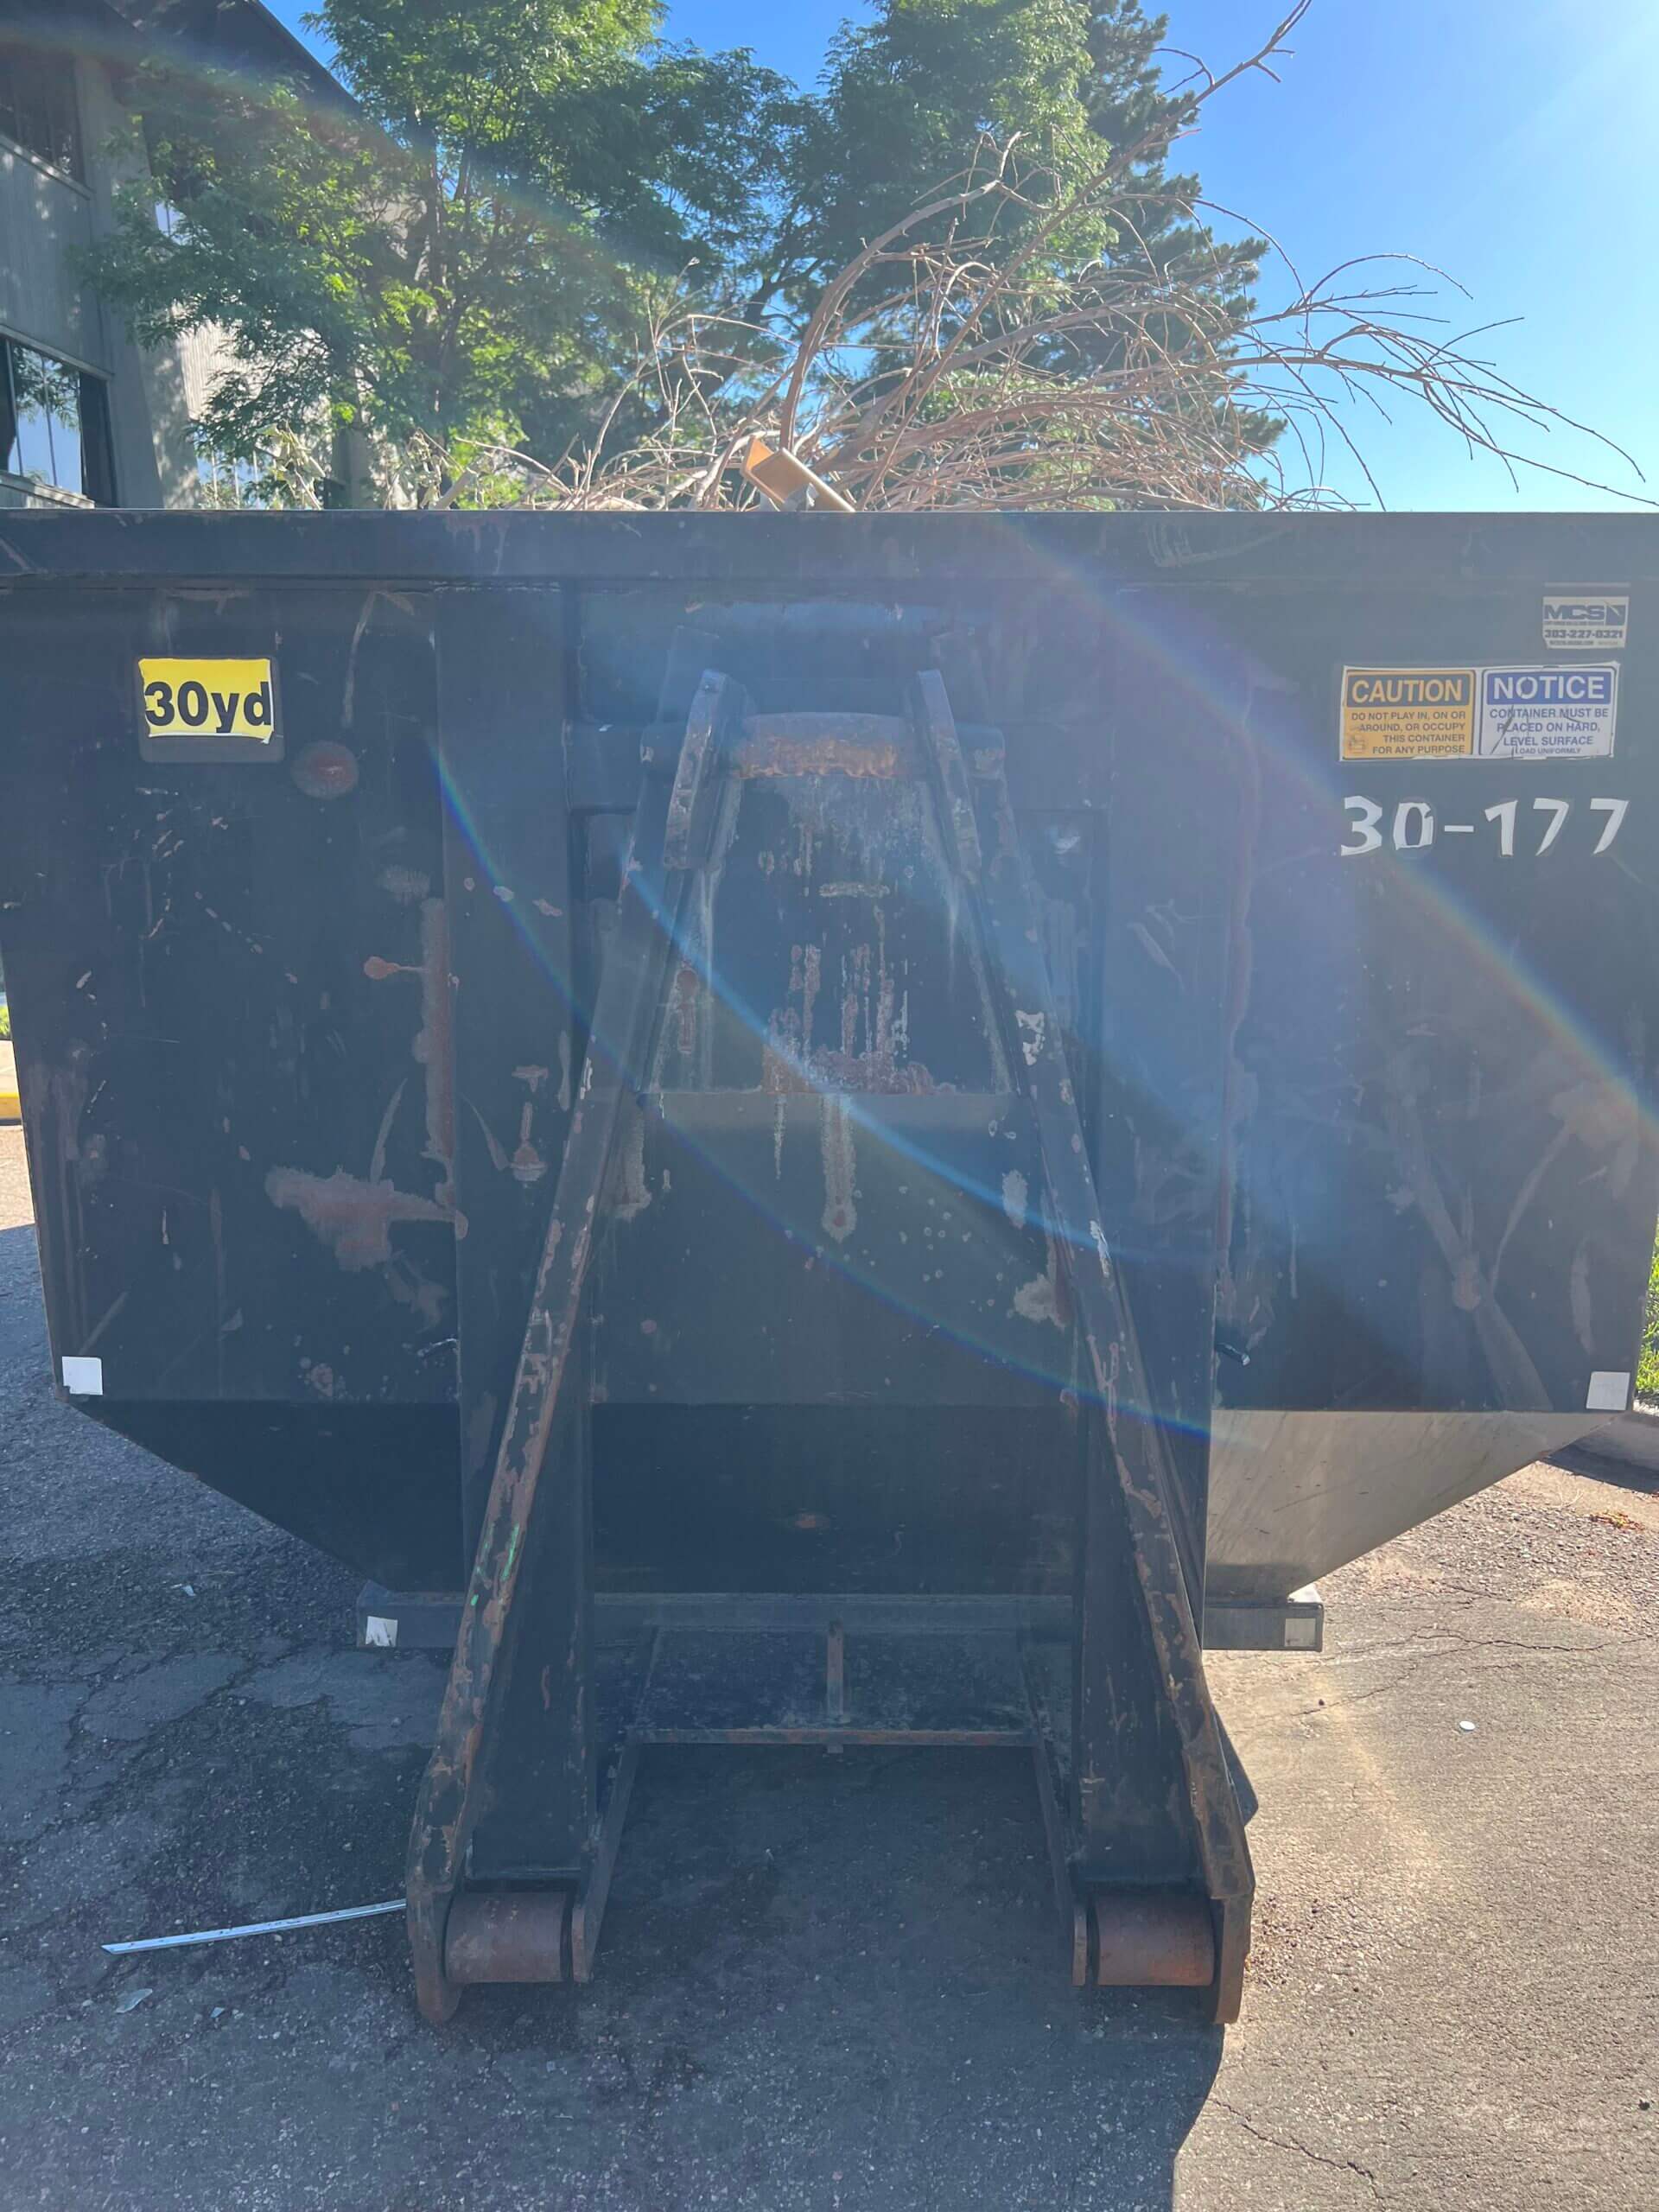 Photo of a 30 yard dumpster rental in Raleigh, NC